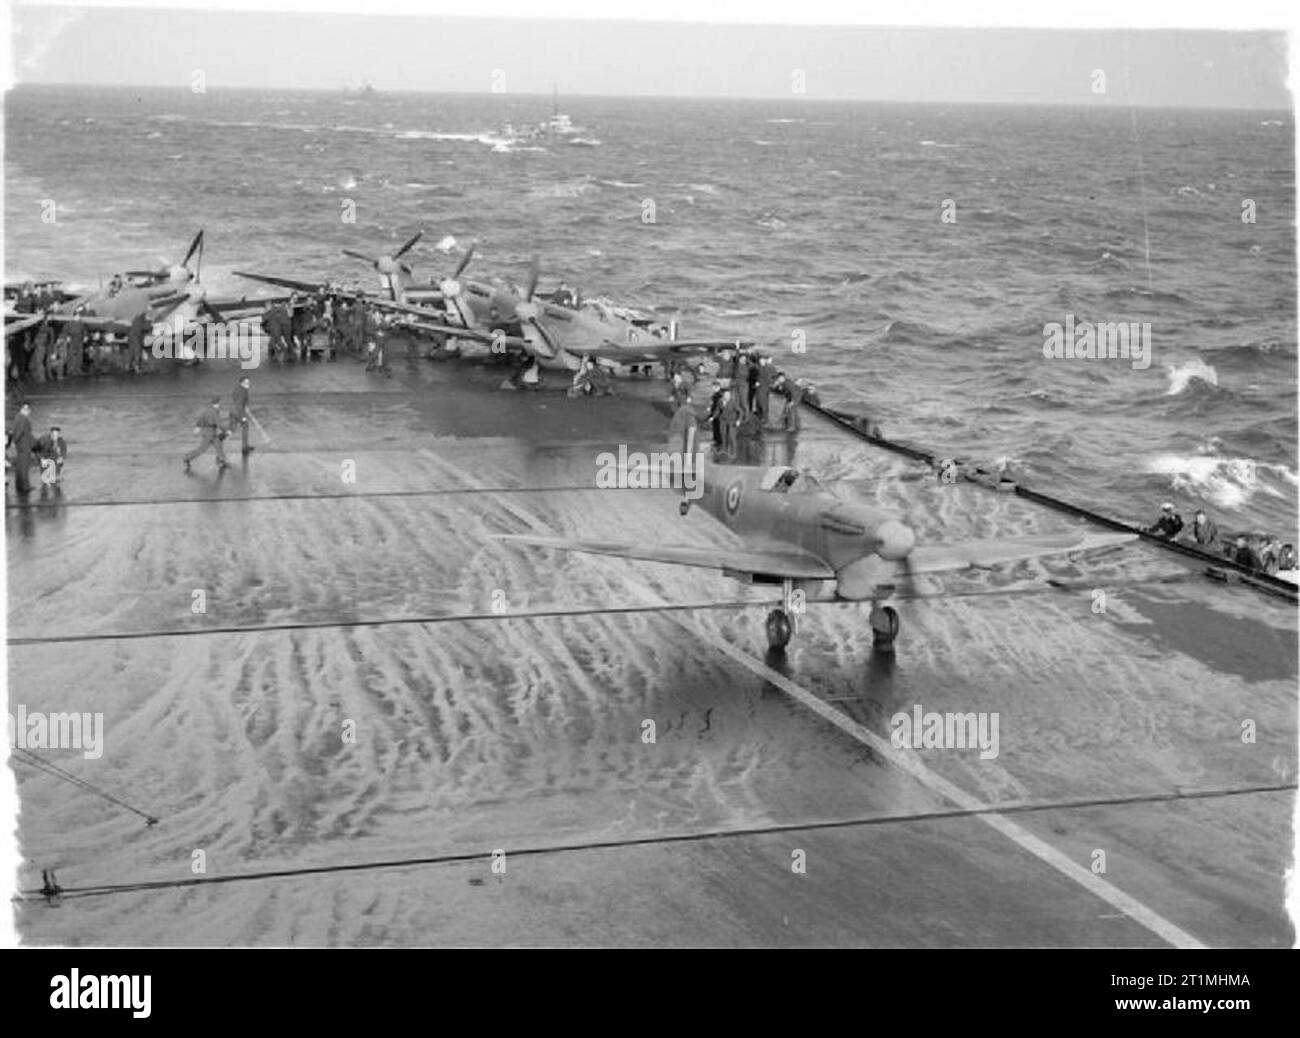 Royal Air Force- Malta and the Mediterranean, 1940-1943. Operation PICKET I: Supermarine Spitfire Mark VB(T), BP844, the first of a further nine Spitfires to reinforce the RAF on Malta, taking off from the flight deck of HMS EAGLE with Squadron Leader E J 'Jumbo' Gracie at the controls. Behind him, the other aircraft await their turn. These Spitfires, equipped with 90-gallon ferry drop tanks, flew to Ta Kali to re-equip No. 126 Squadron RAF, which Gracie was to command. BP844 was shot down over Malta, with the loss of its pilot, on 2 April 1942. Stock Photo